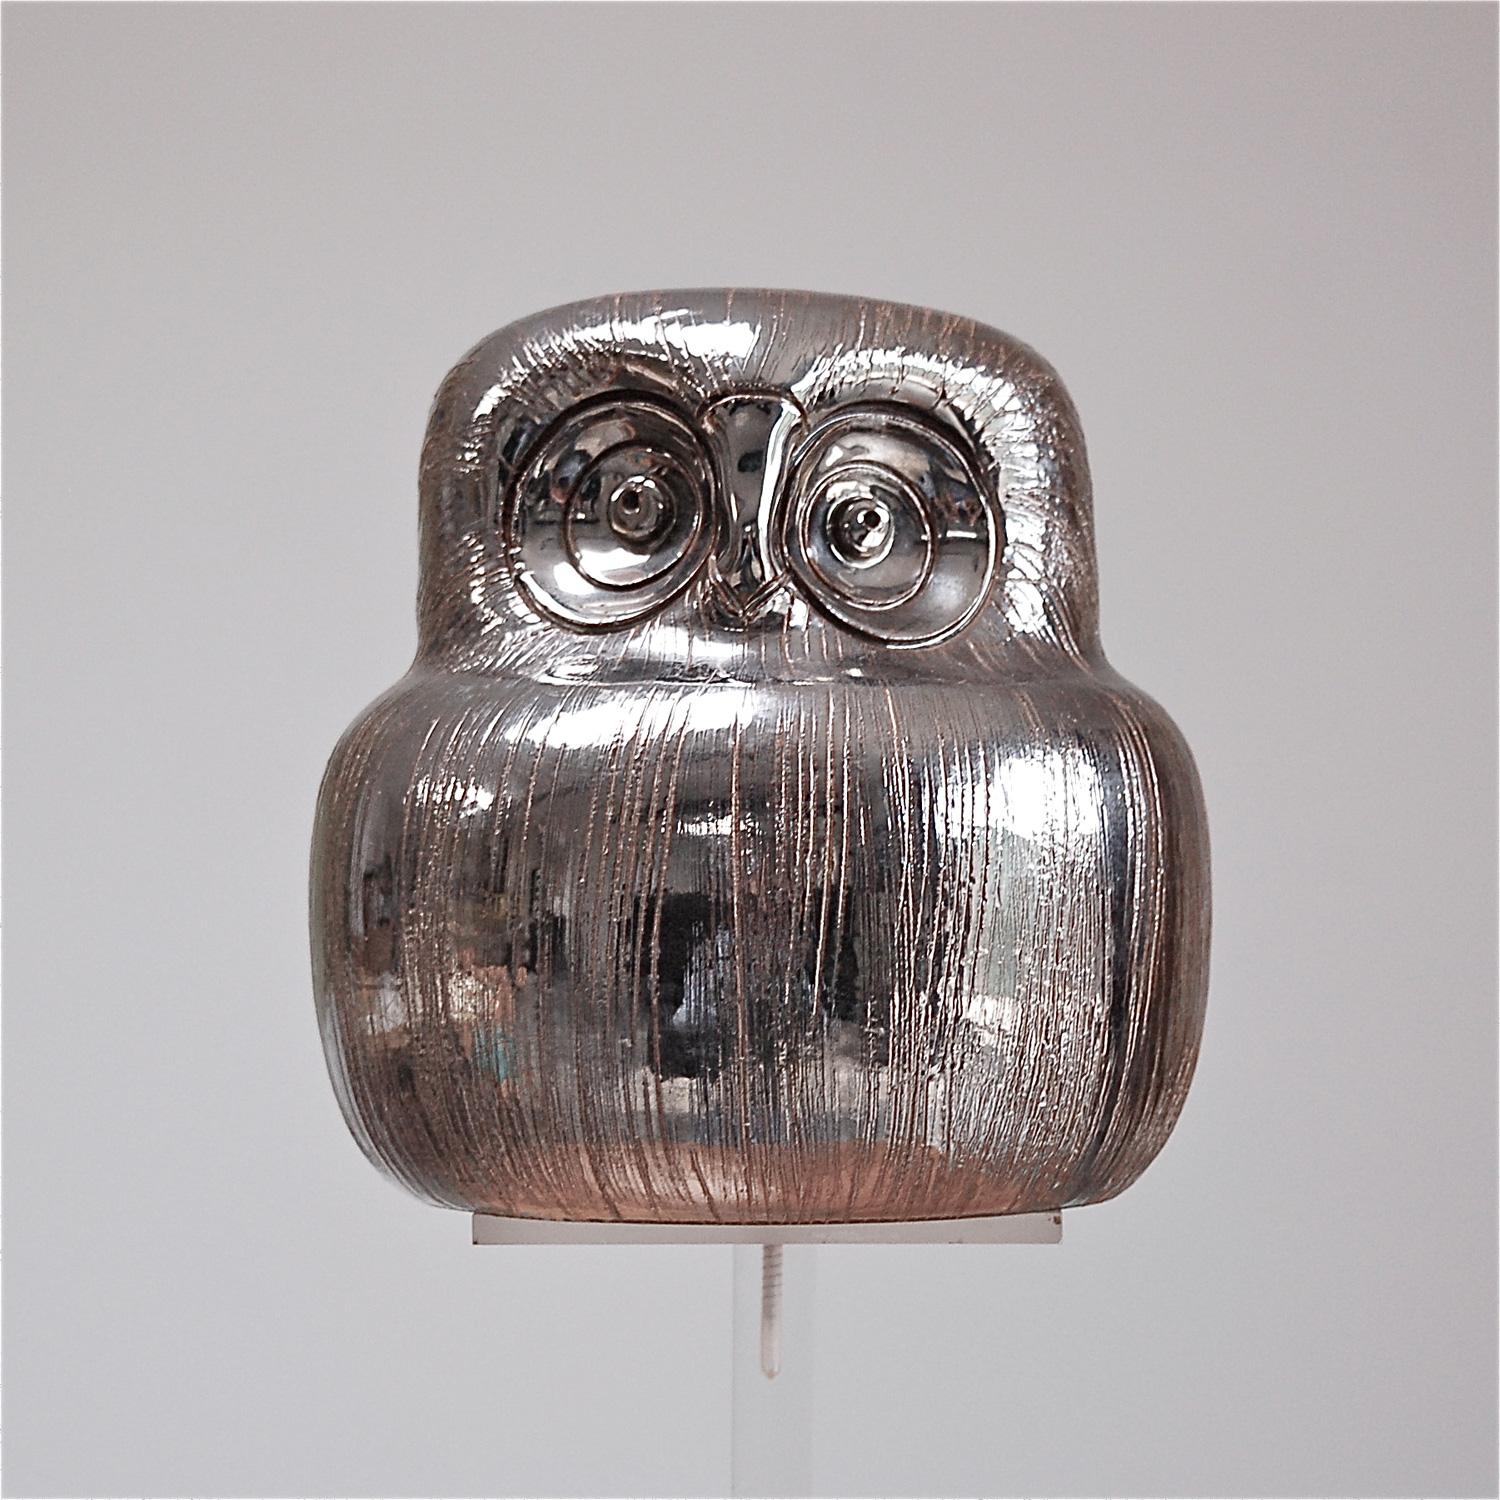 A handmade ceramic owl designed by Aldo Londi for Bitossi in the 1960s. This characterful owl figurine is made from red terracotta clay with lines engraved by hand and finished with a silver metallic glaze highlighting the fine-grained structures on